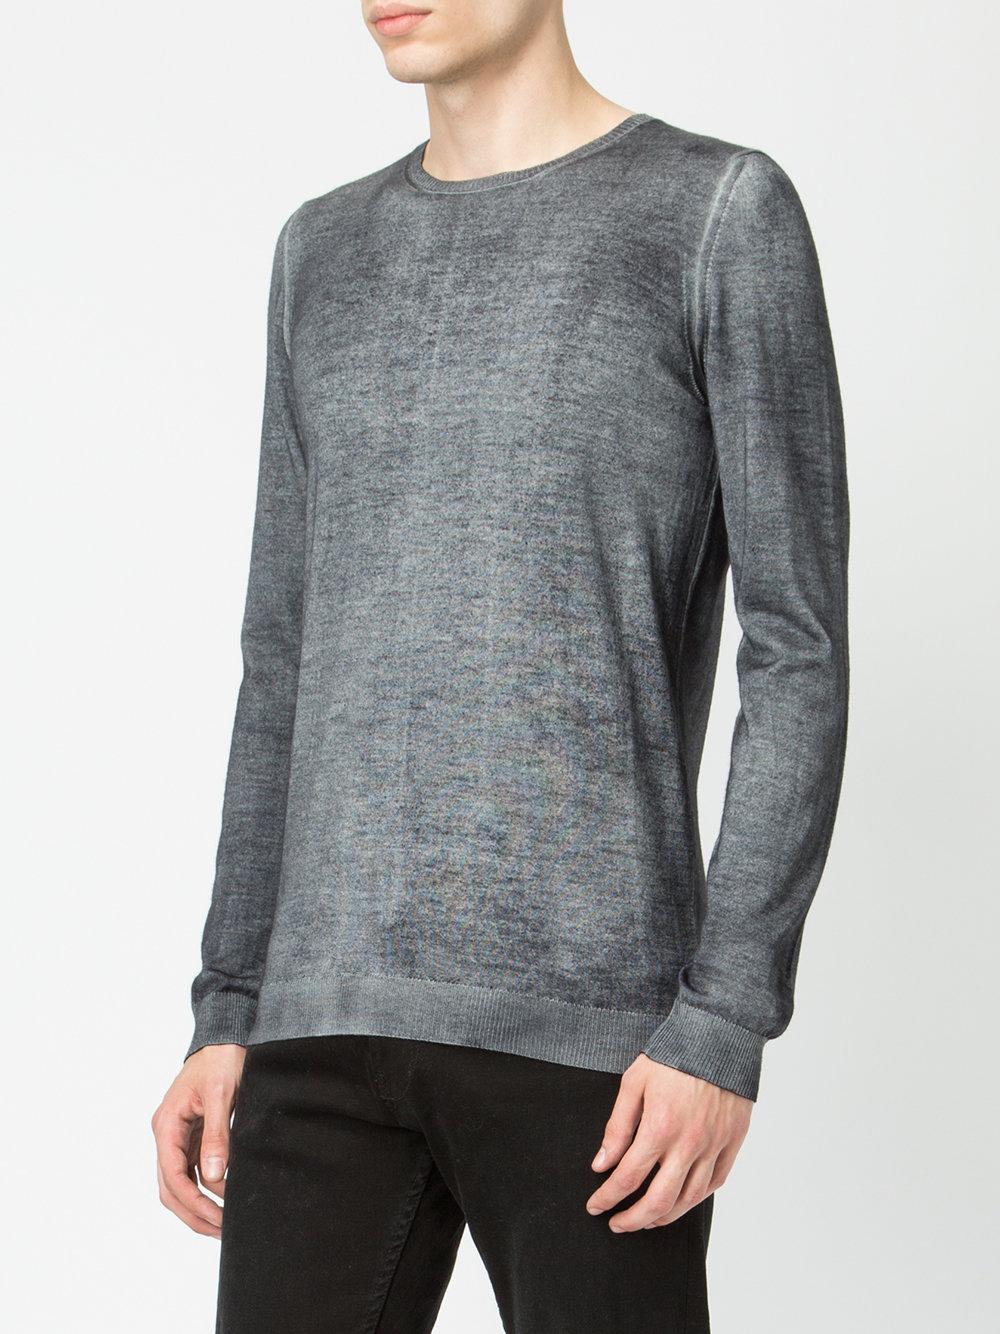 Avant Toi Cashmere Crew Neck Sweater in Grey (Gray) for Men - Lyst